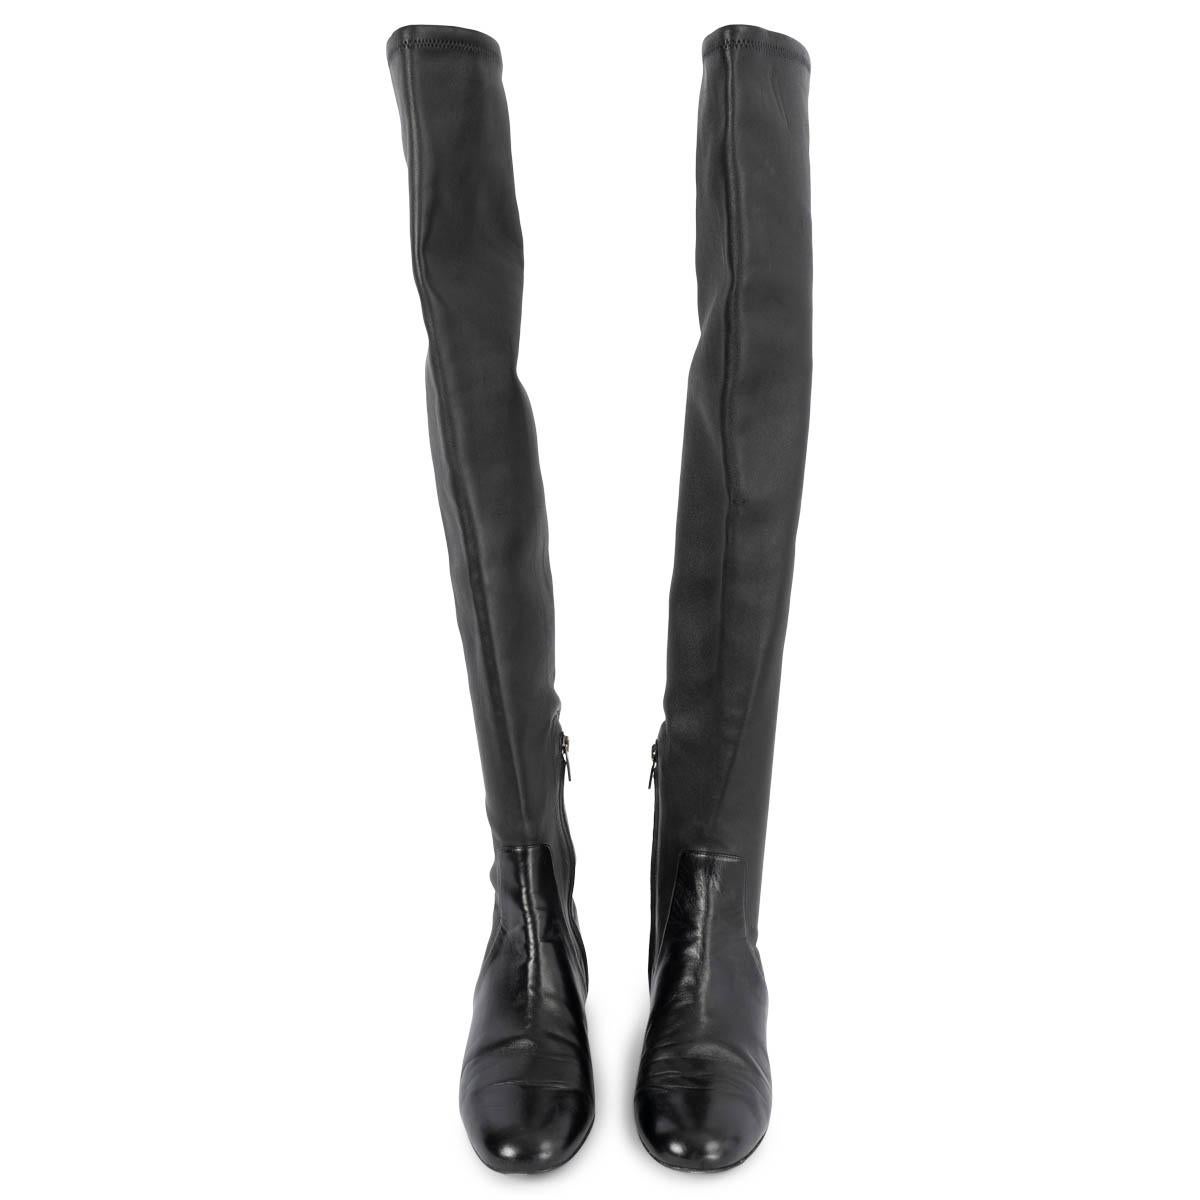 100% authentic Salvatore Ferragamo over knee boots in black stretch nappa with hidden zipper and sculptural flower heel with galvanized metallic finish. Have been worn and are in excellent condition.

2017 Fall/Winter

Measurements
Imprinted